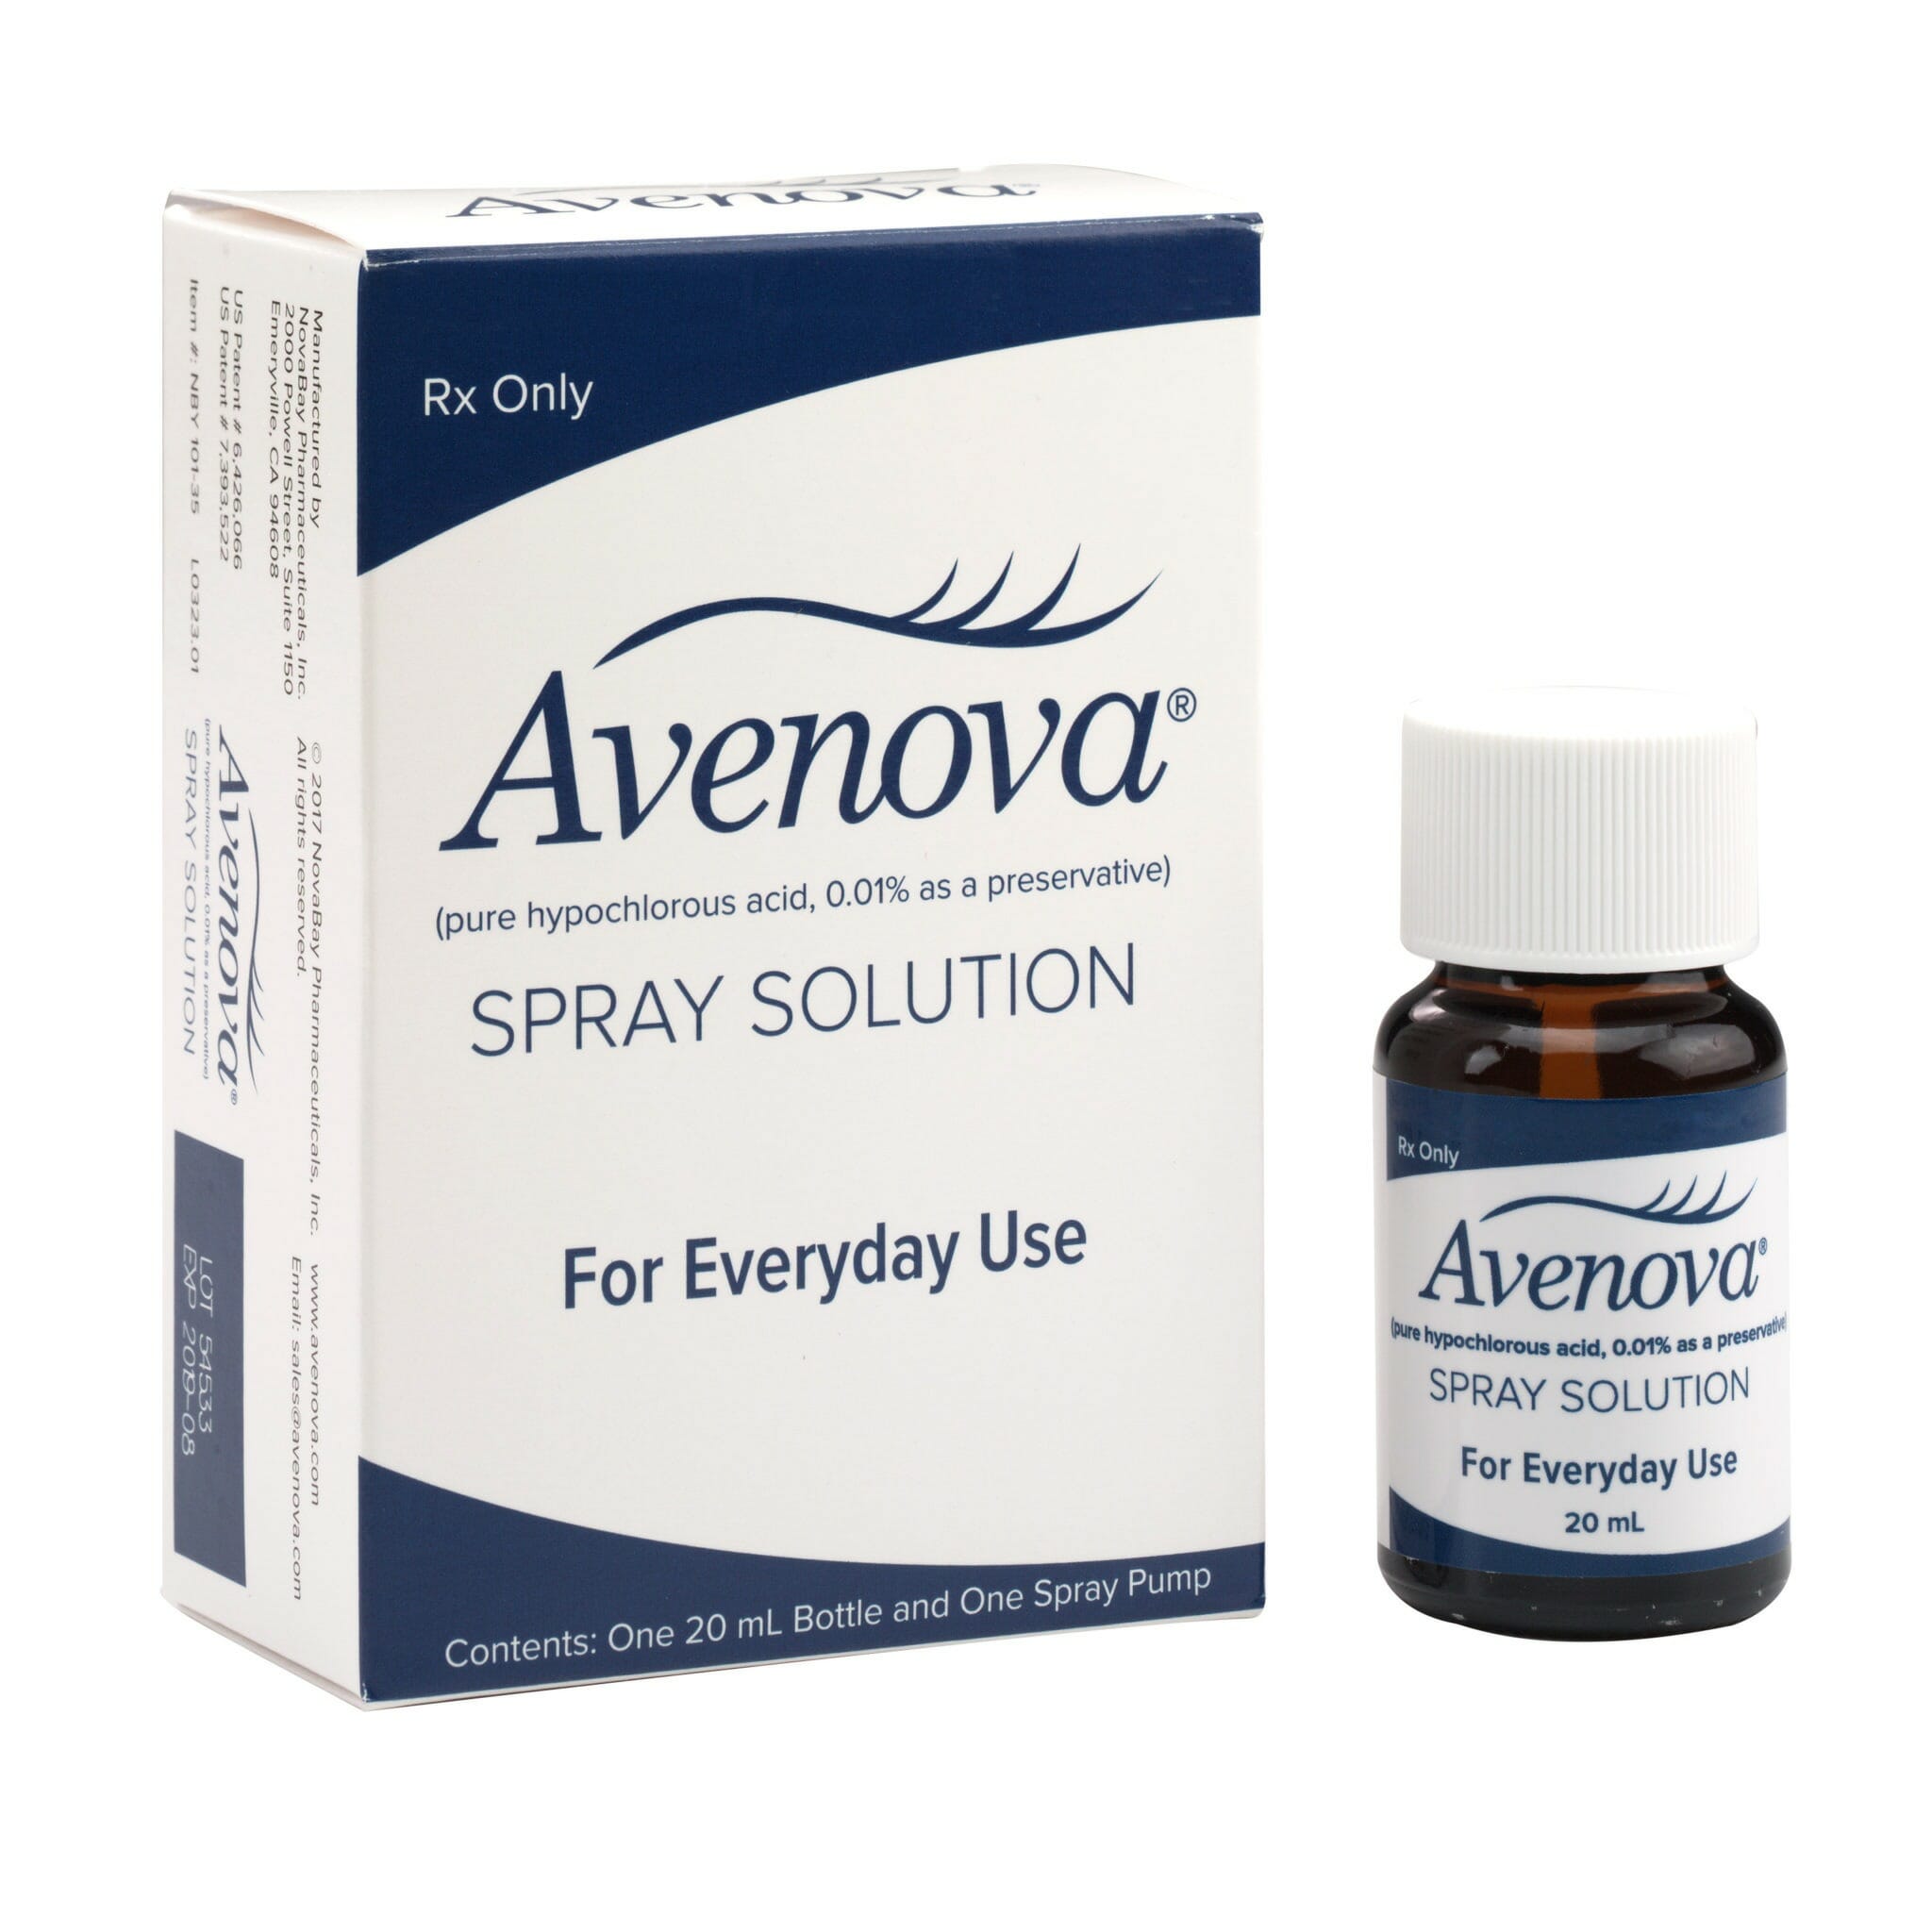 What are the ingredients in Avenova before I buy, and what's its 4 or 5-Star rating percentage?